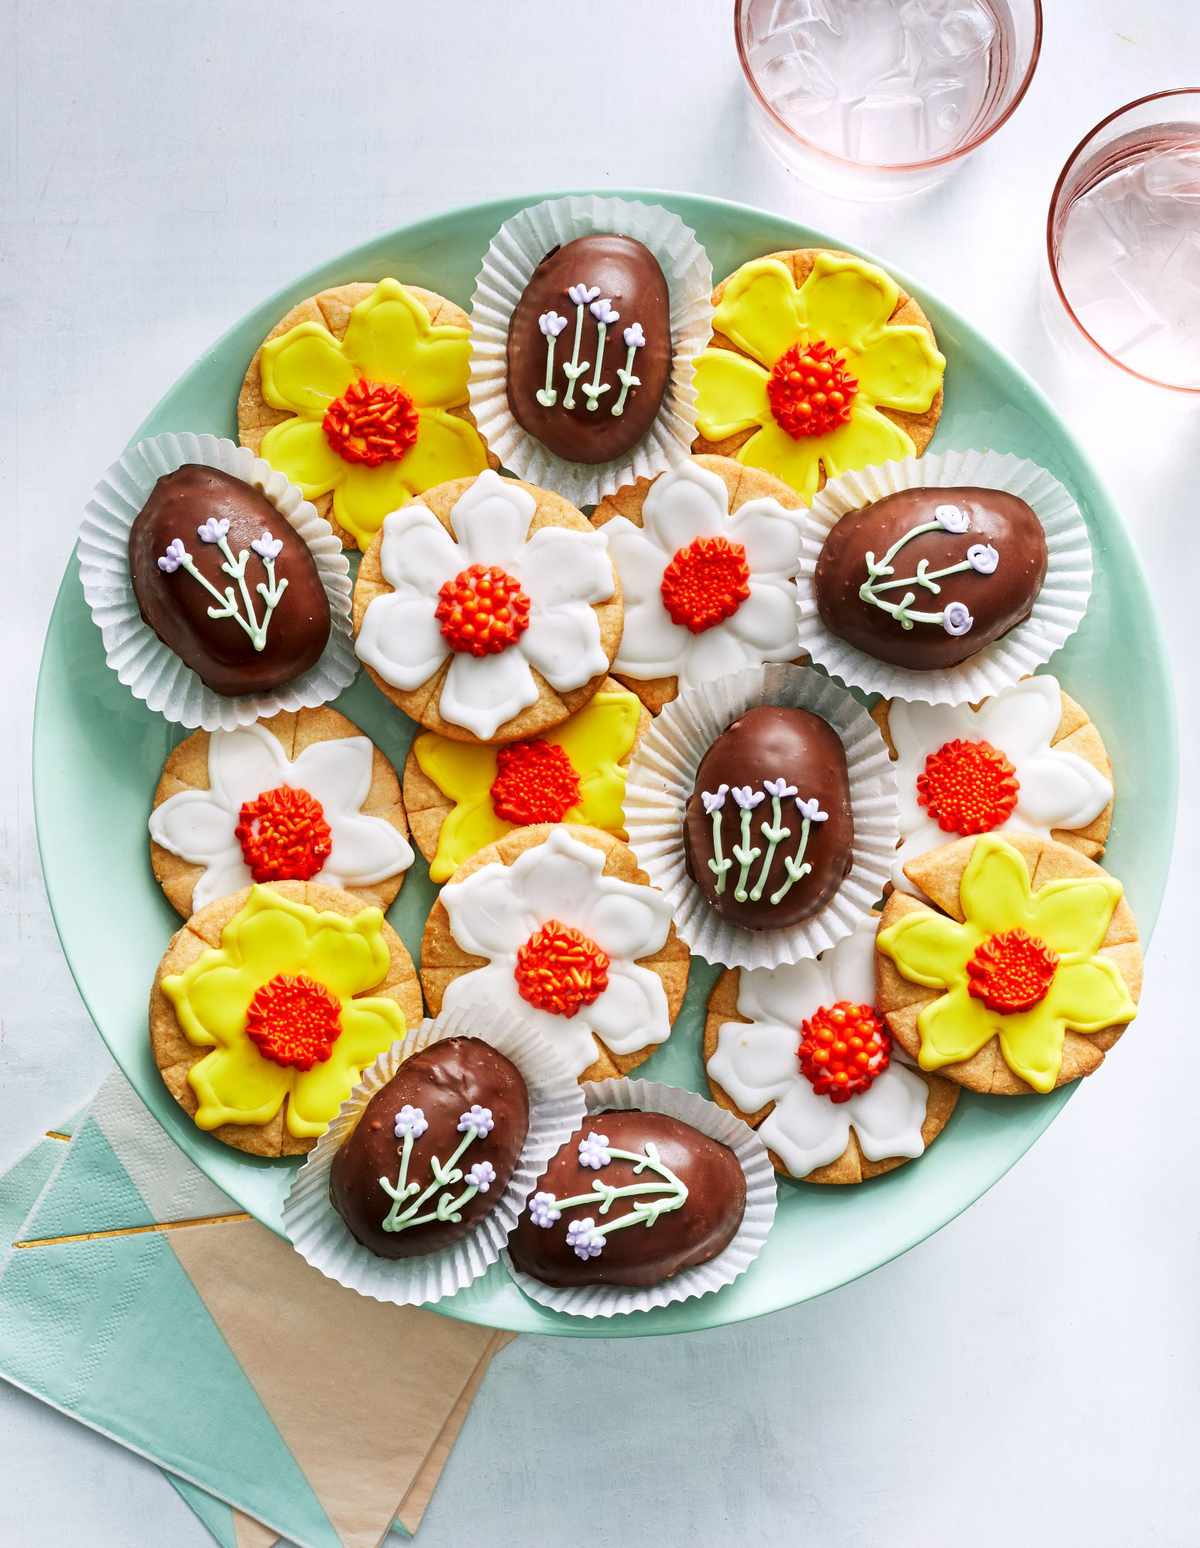 Festive Easter Recipes Your Family Will Love